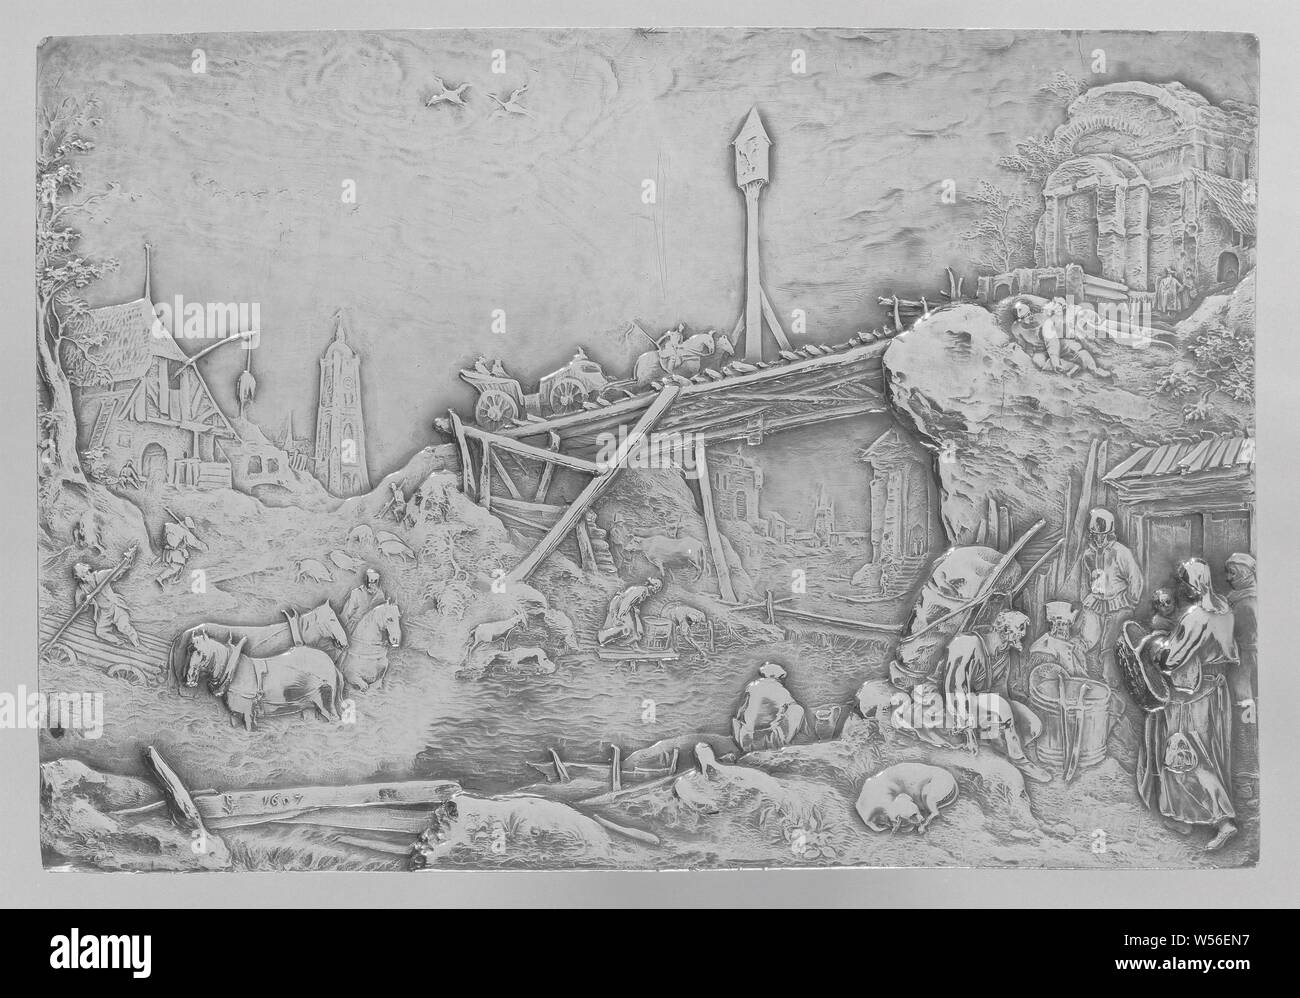 River Landscape River landscape, Rectangular, silver plaque. A wooden bridge stands on the high banks of a stream, over which a carriage strung with two horses runs. Figures and animals in the landscape, horses wading in the water. Right in the foreground, gathered around a tub, a group of five people and a dog. A little further on the waterfront a fisherman, bridge in village across river, canal, etc., Paulus Willemsz. van Vianen, Praag, 1607, silver (metal), h 8.3 cm × w 12.0 cm × t 0.3 cm Stock Photo